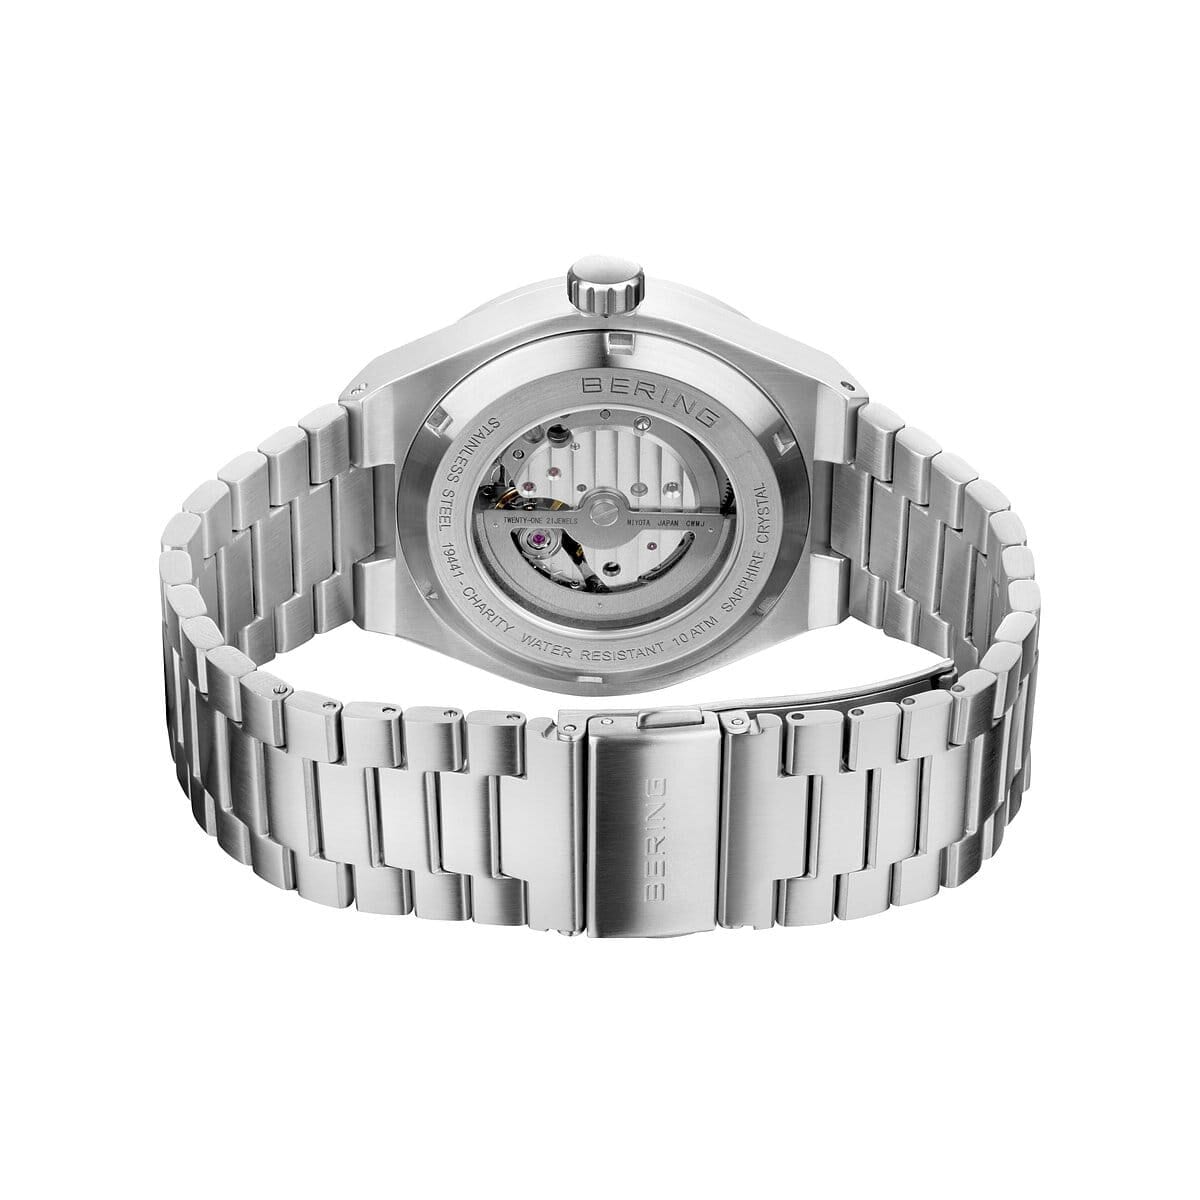 Bering Automatic